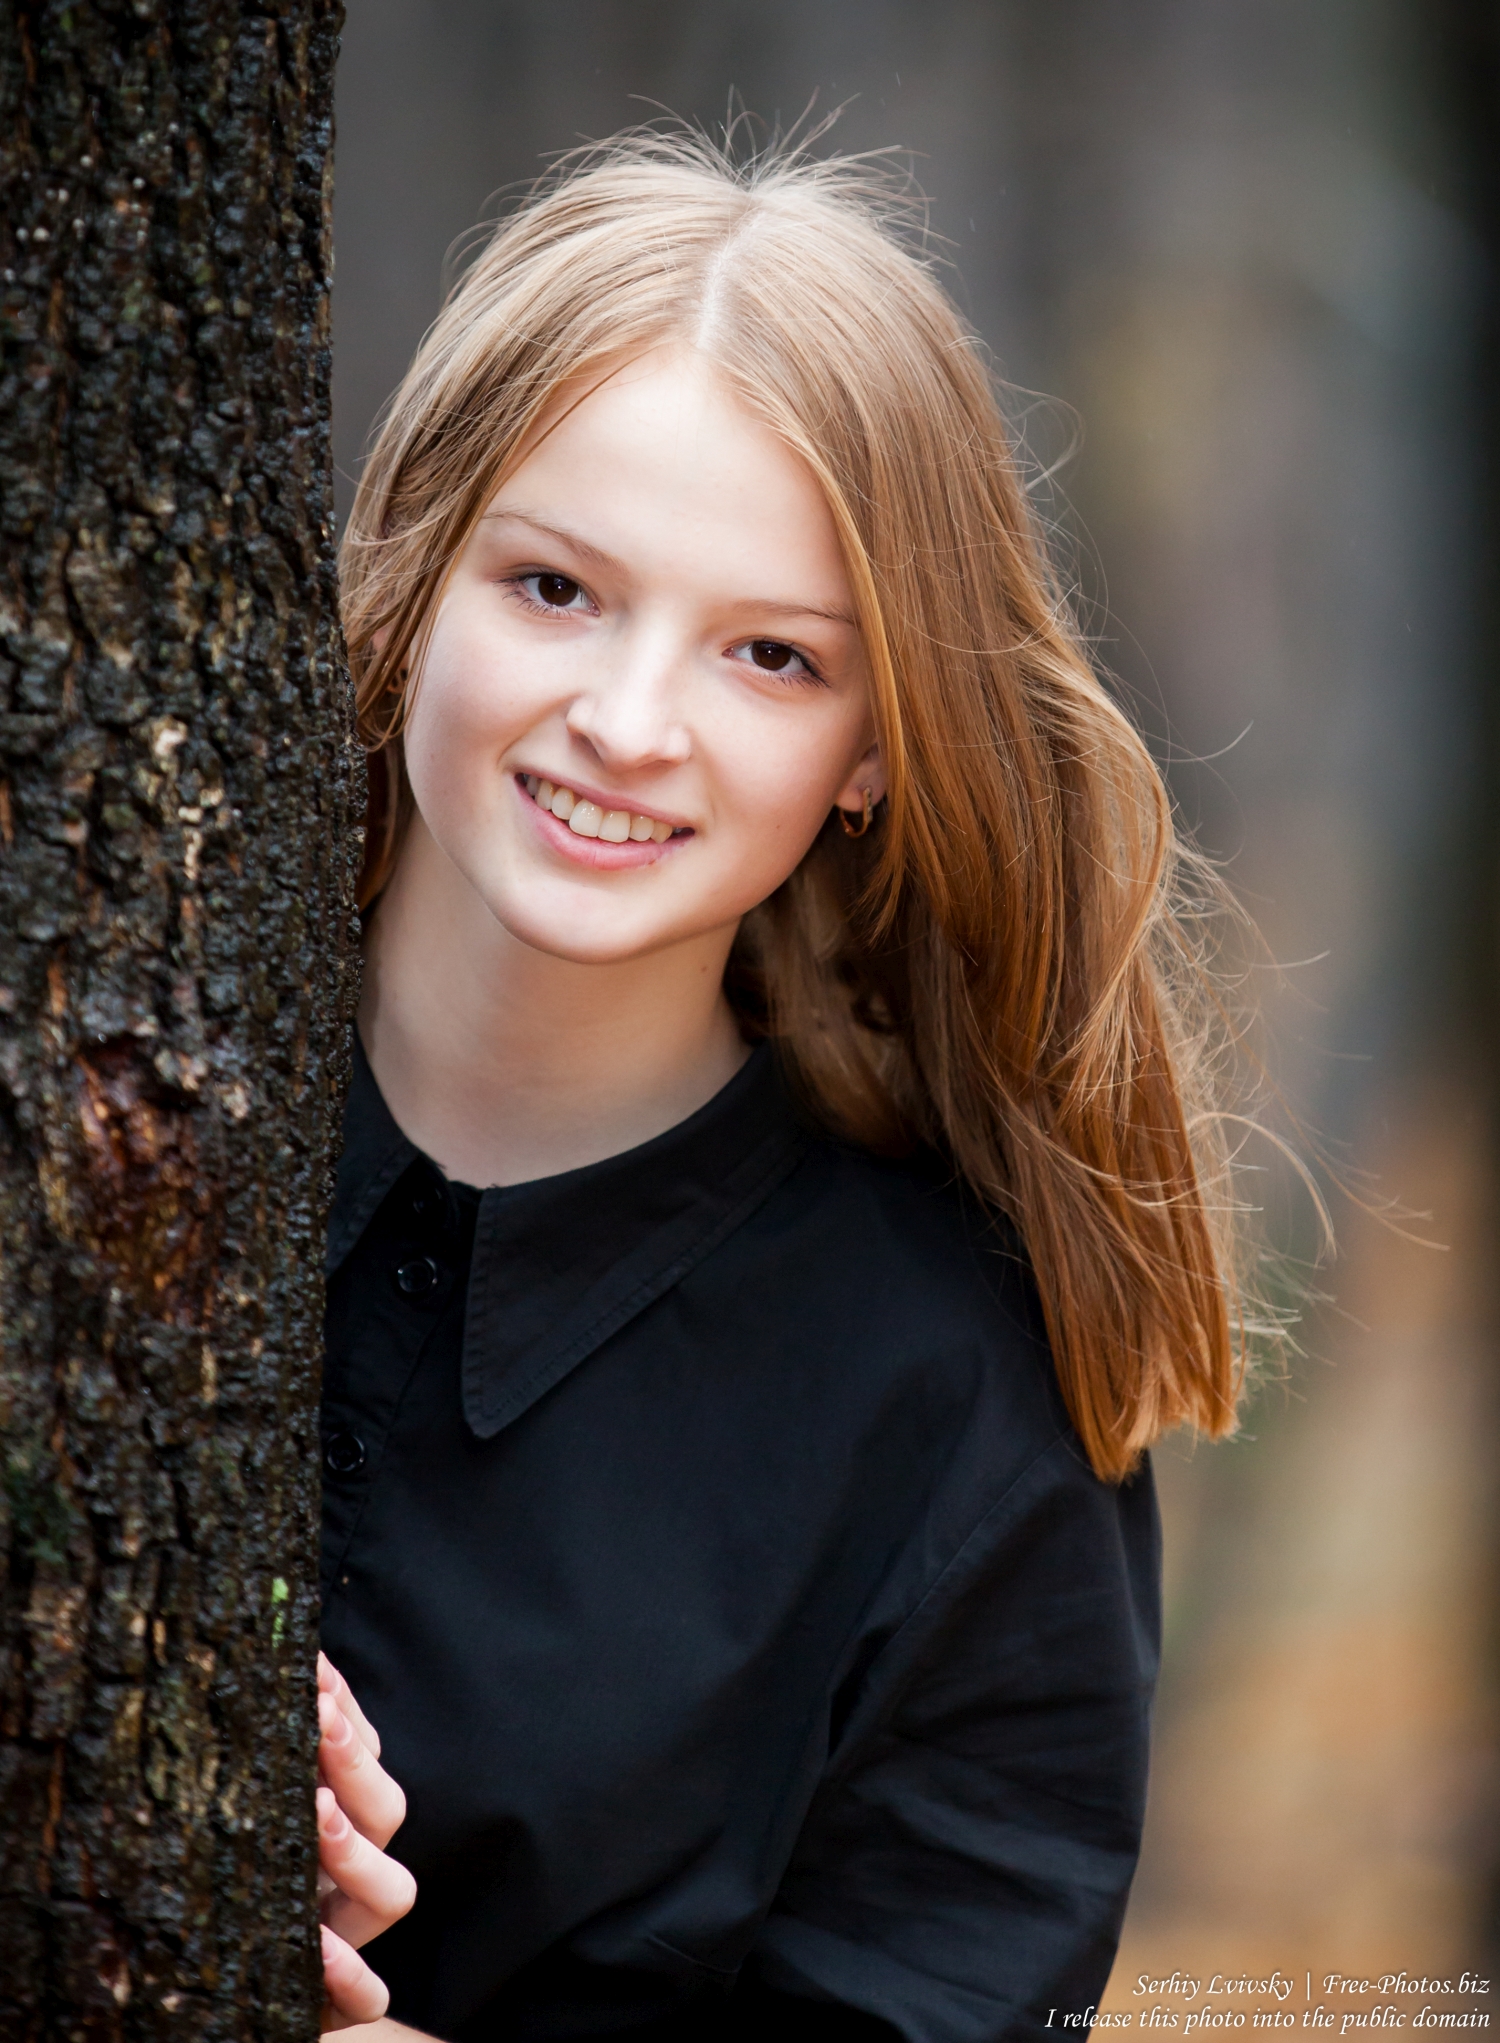 A 13-year-old Catholic girl photographed by Serhiy Lvivsky in November 2015